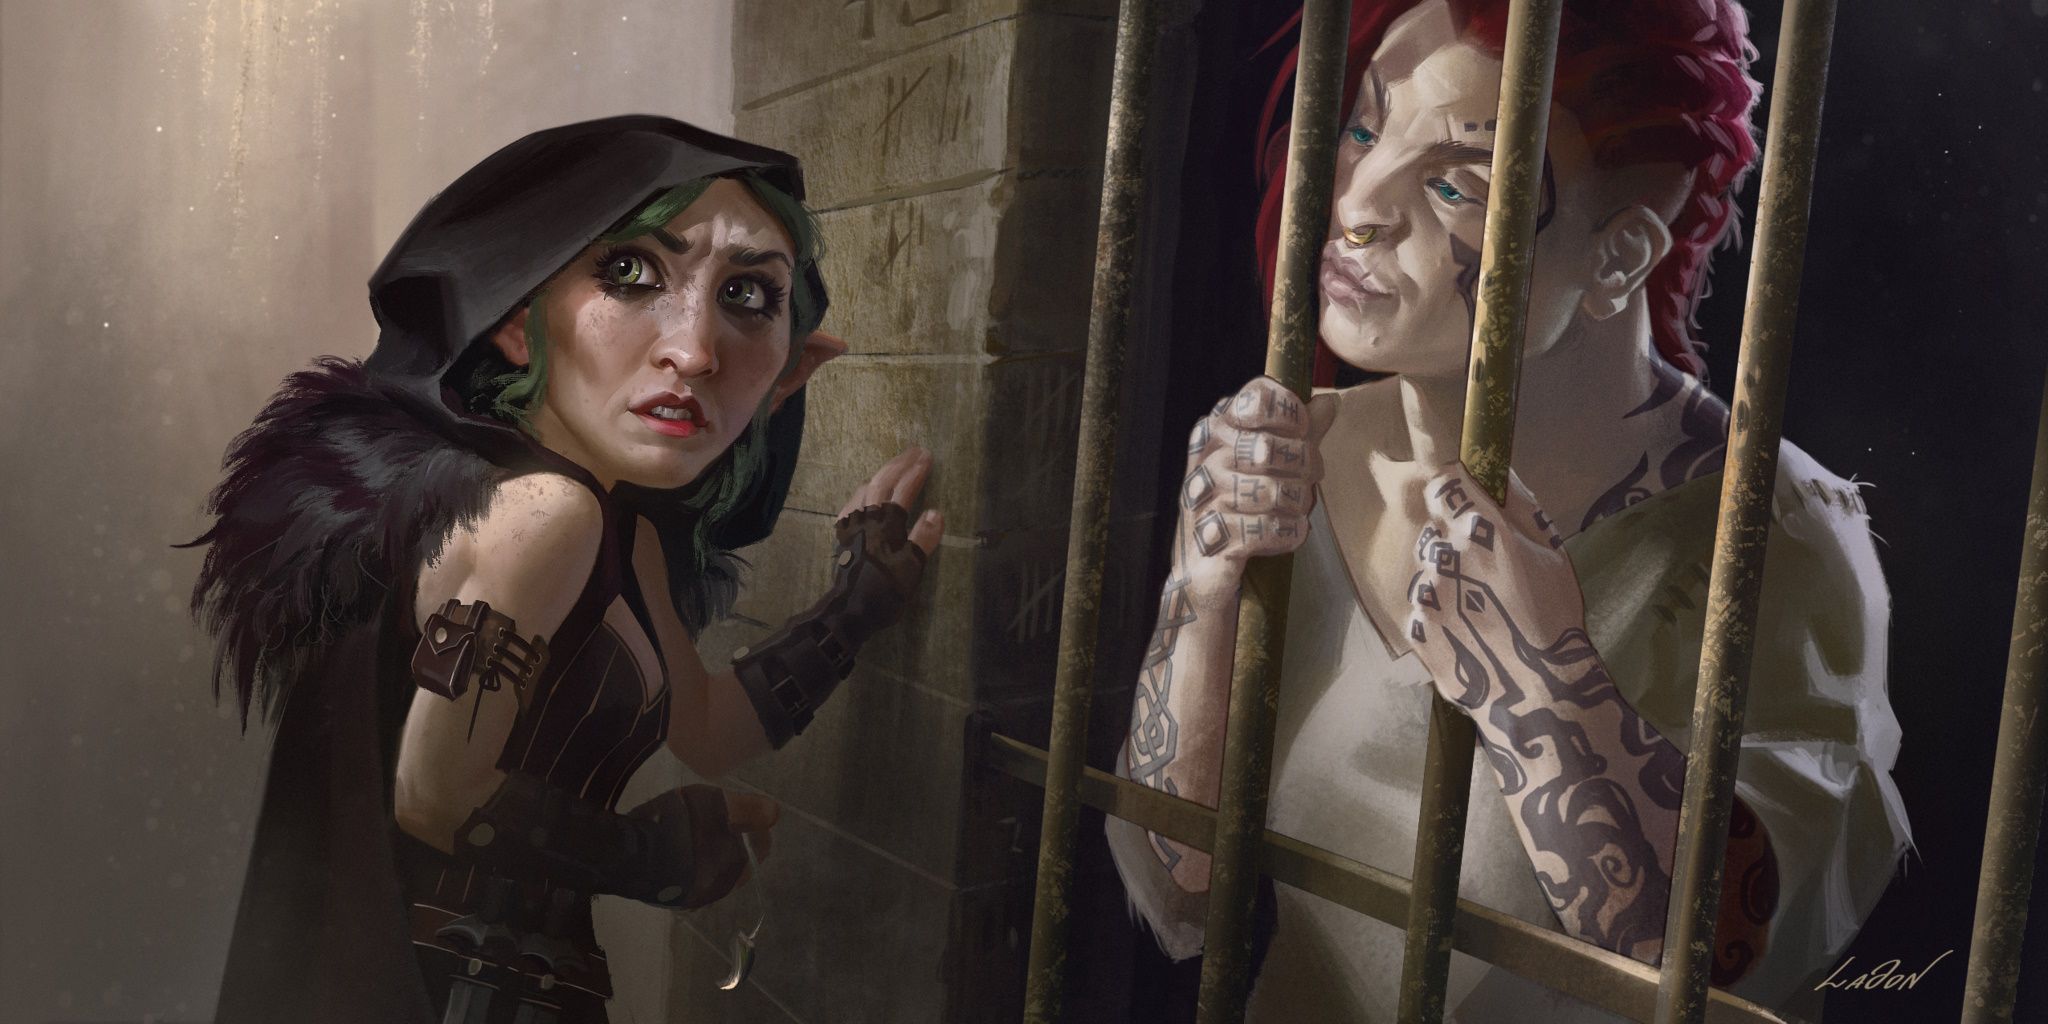 D&D Keys From The Golden Vault Heist Scene. Gnome rogue looking over her shoulder before opening a prison cell with a tattood red haired person inside.